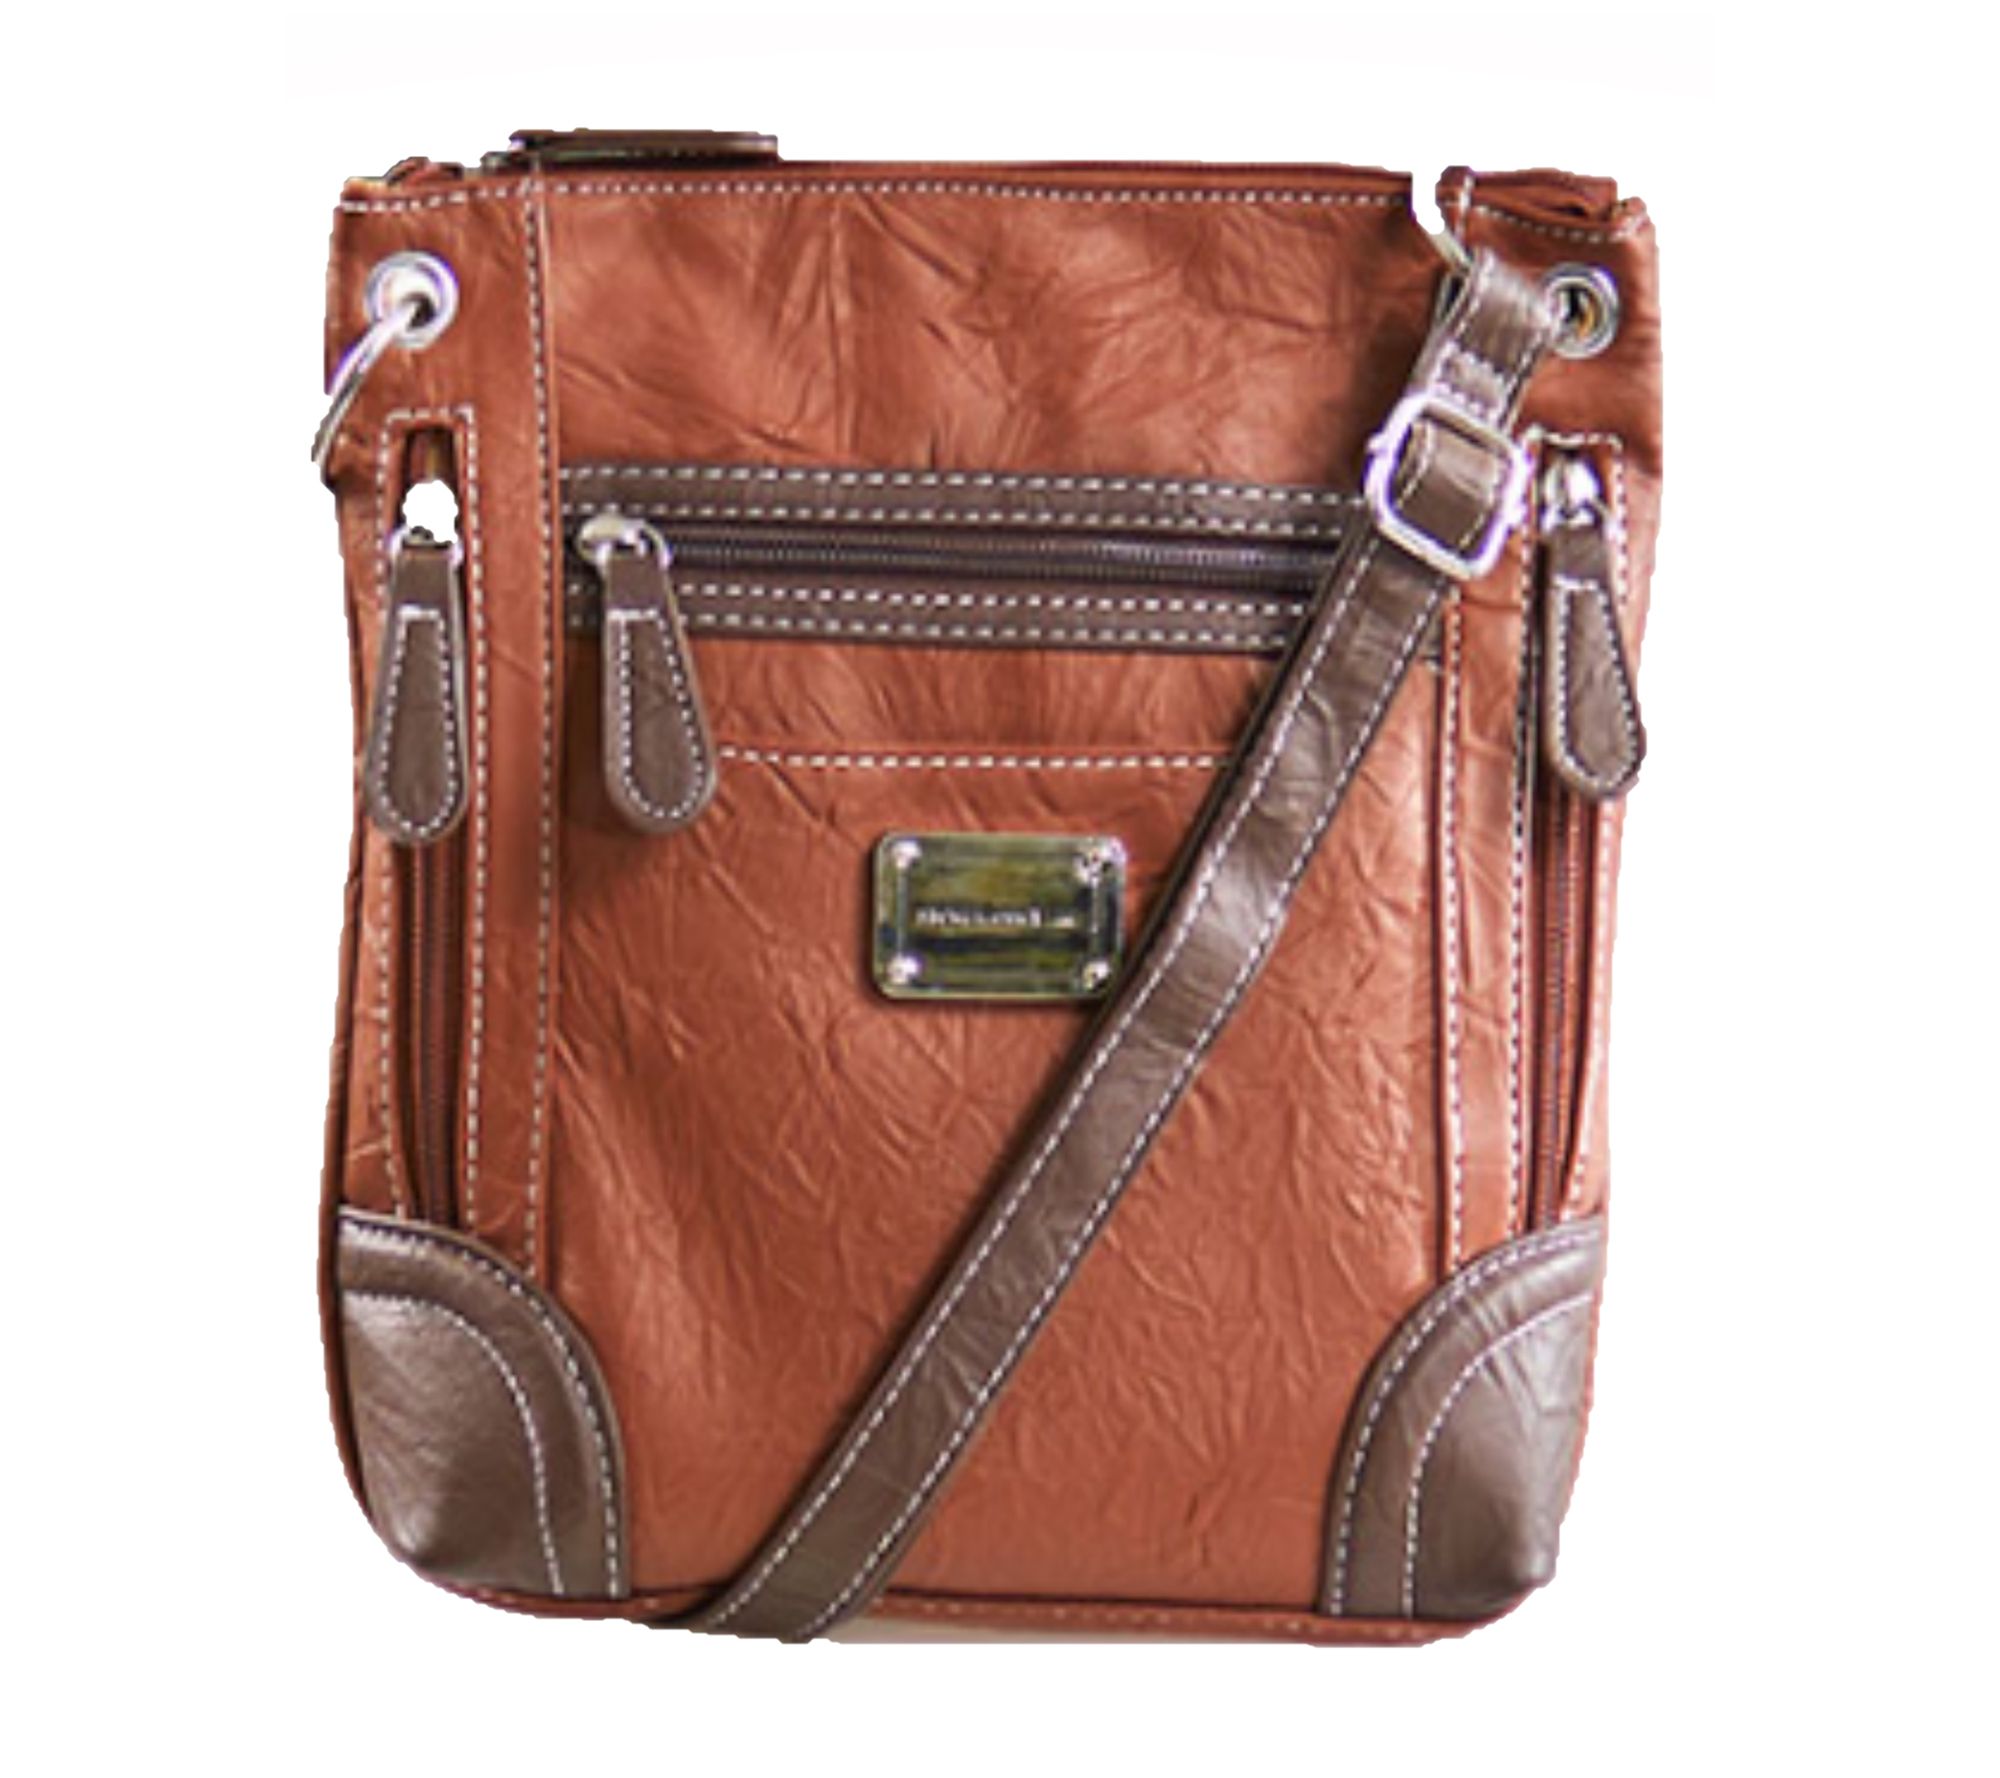 Stone Mountain Washed Leather Tote Bag